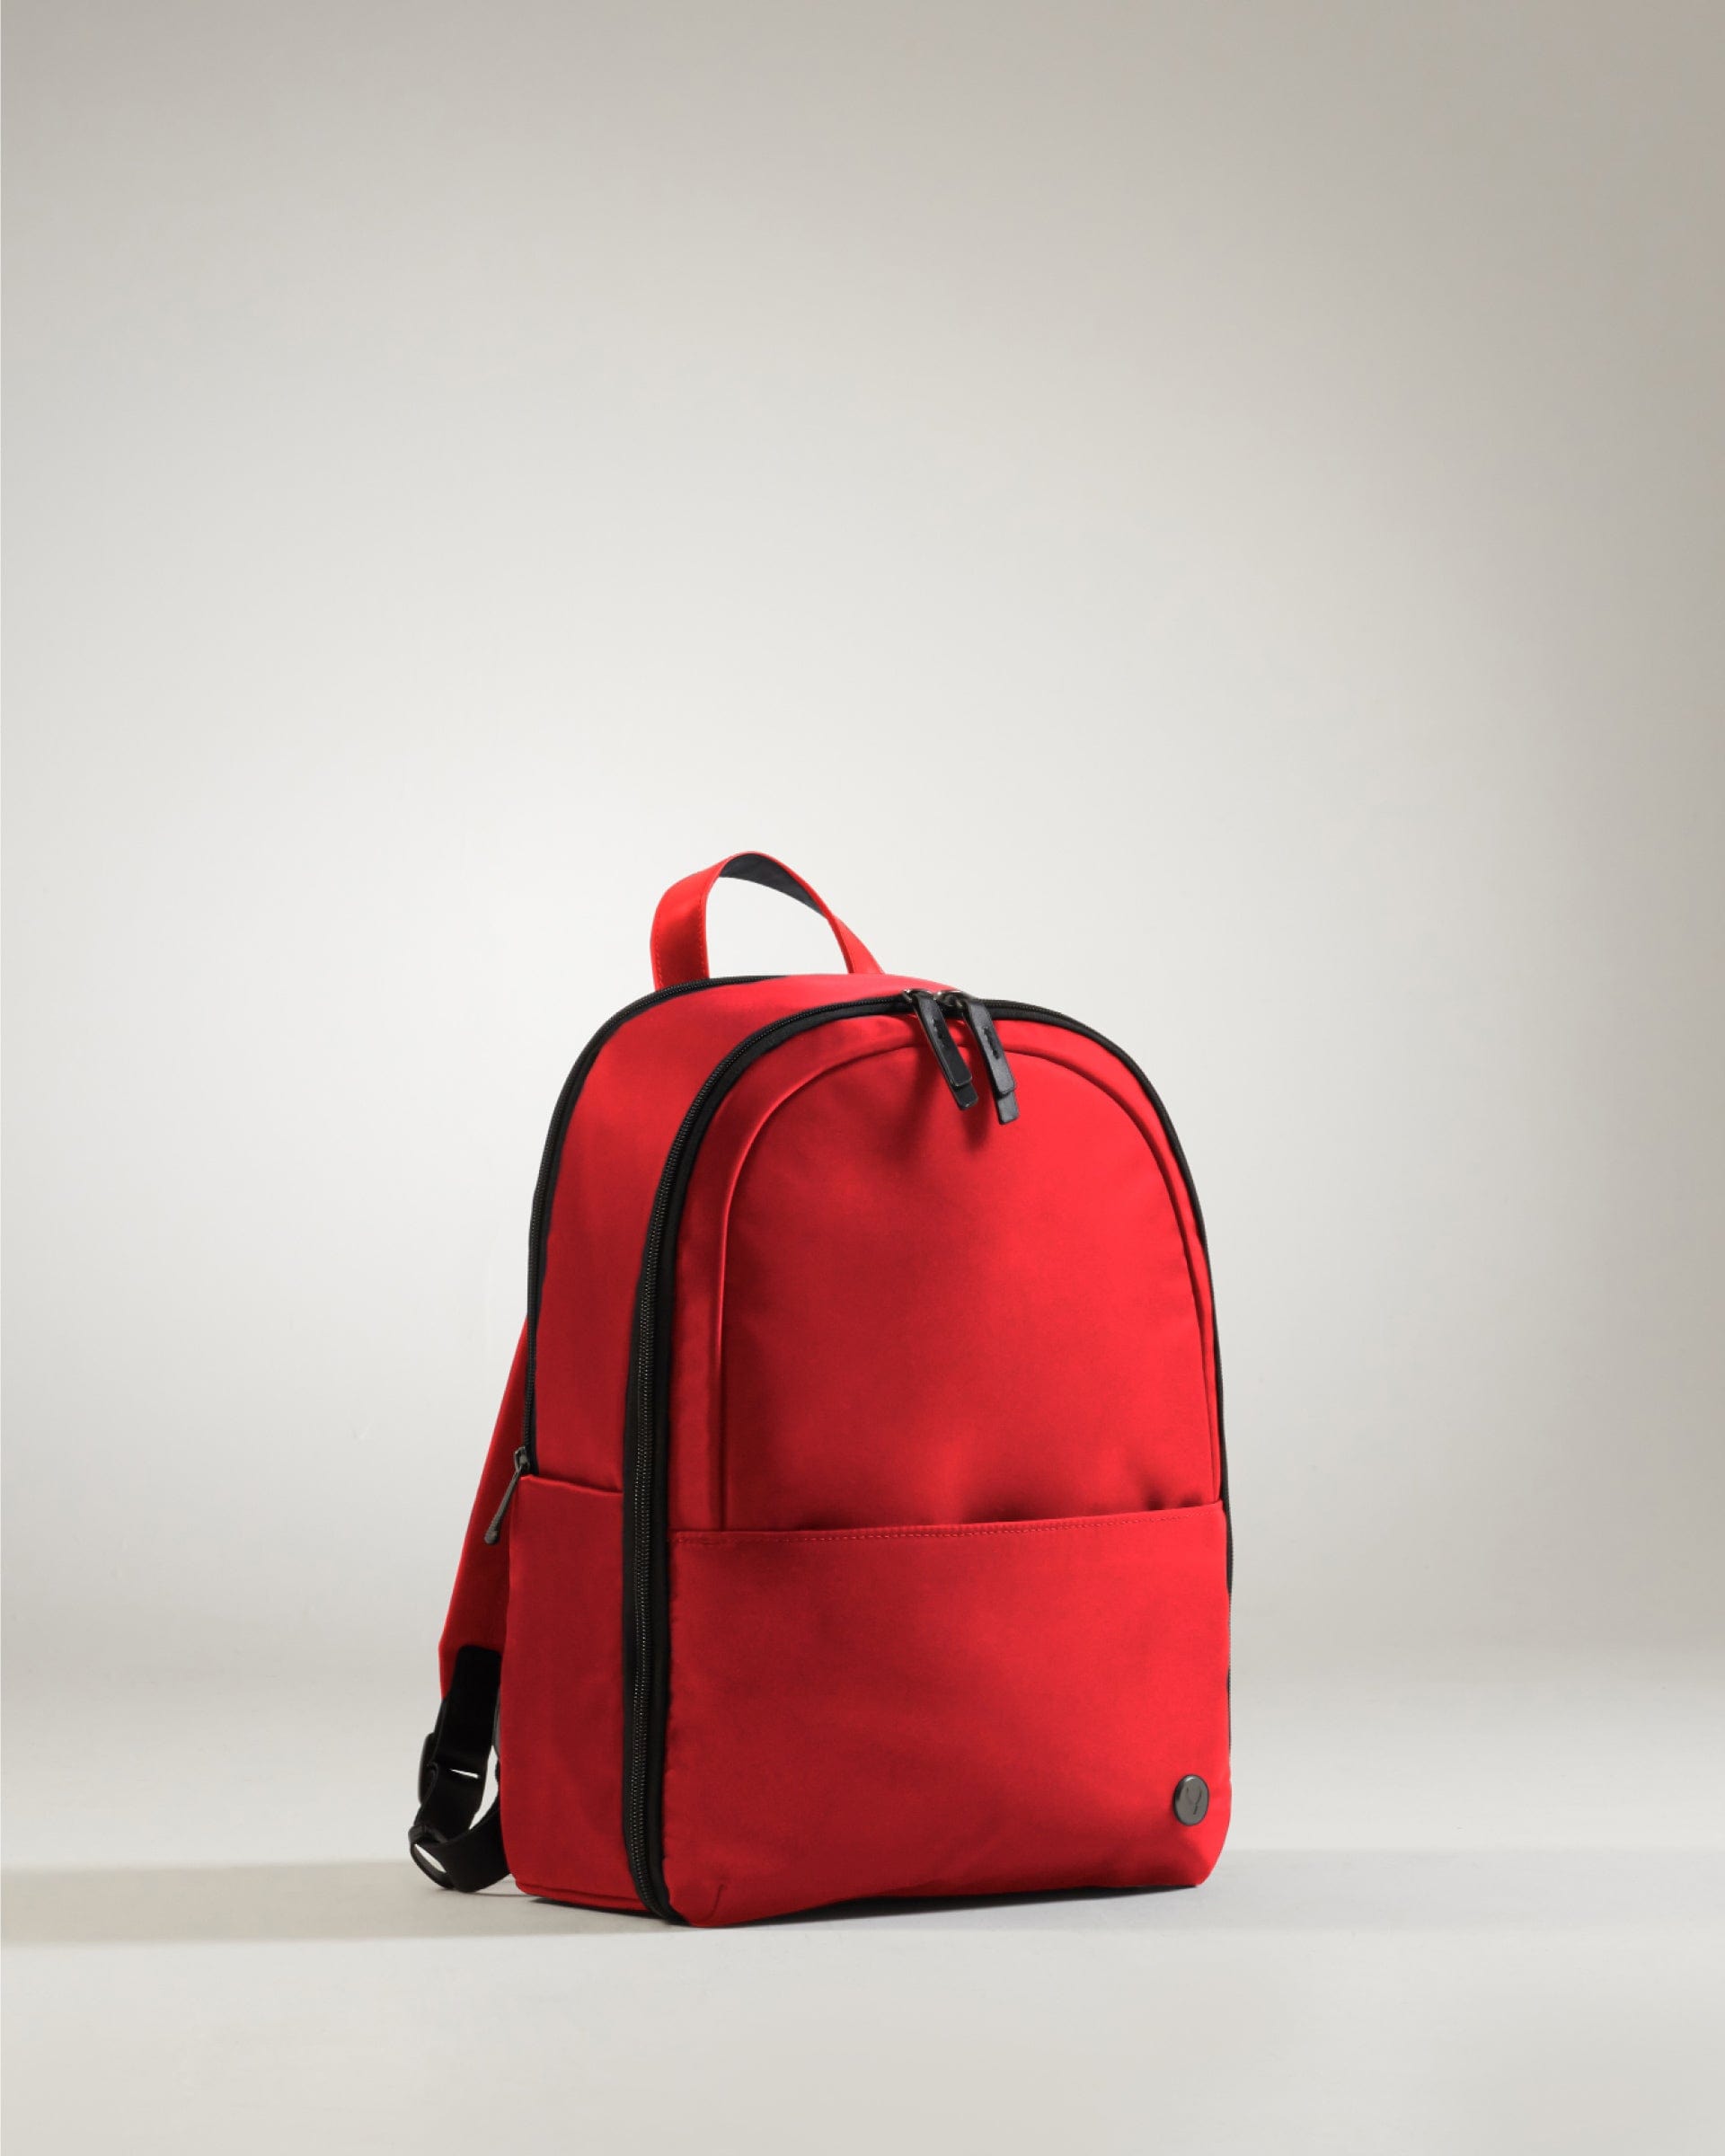 View Antler Chelsea Backpack In Poppy Size 40 x 28 x 17 cm information